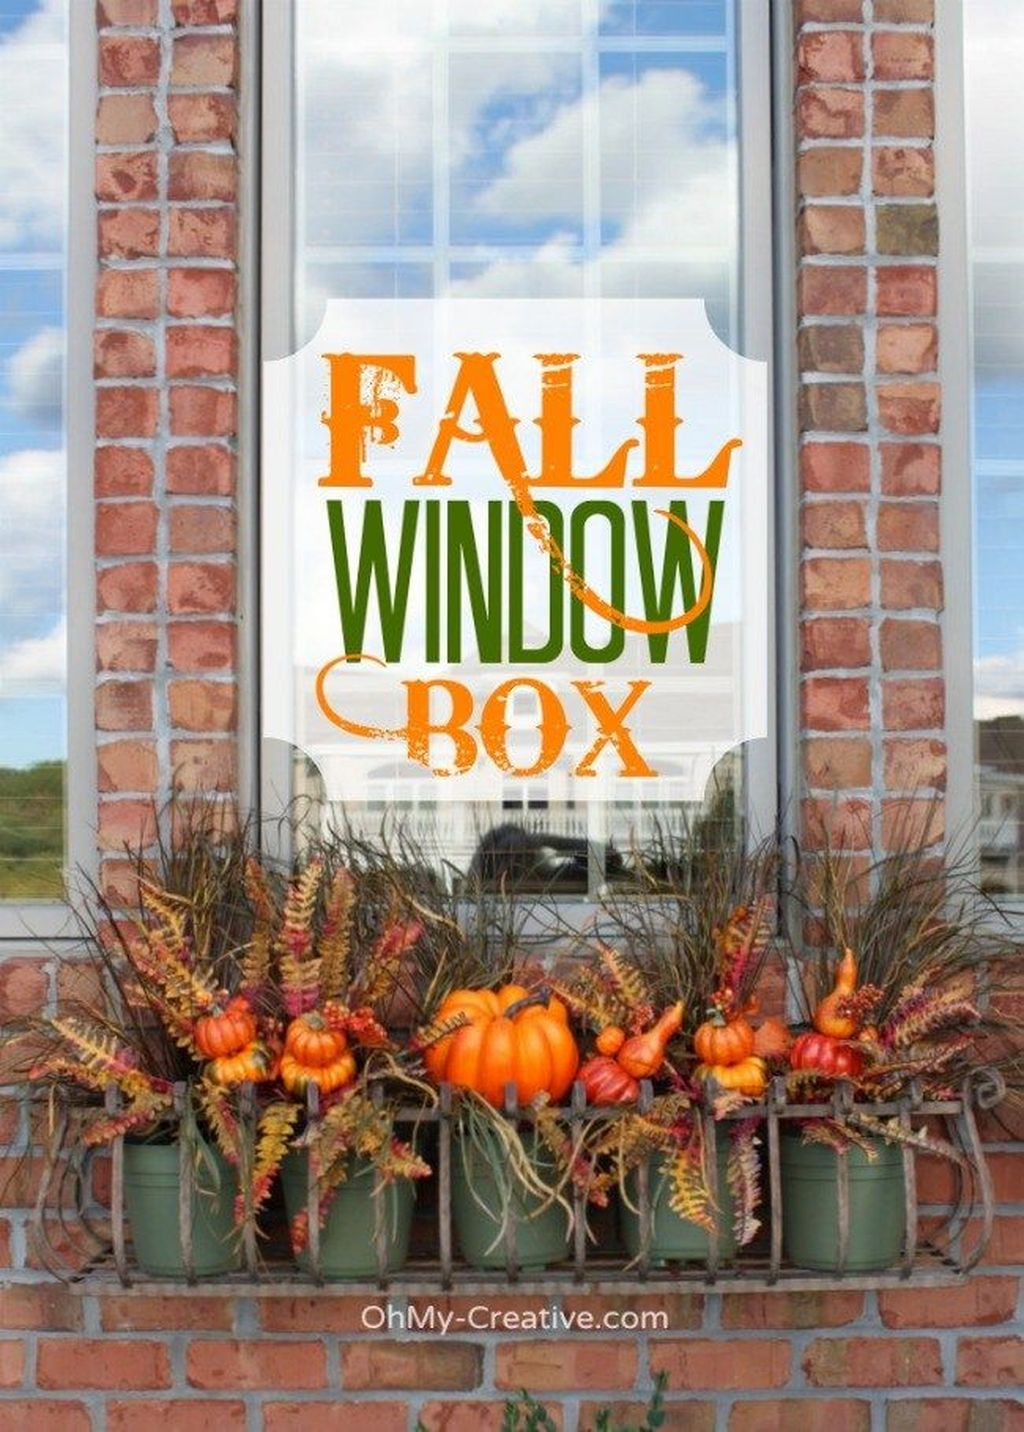 Amazing Windows Flower Boxes Design Ideas Must See31